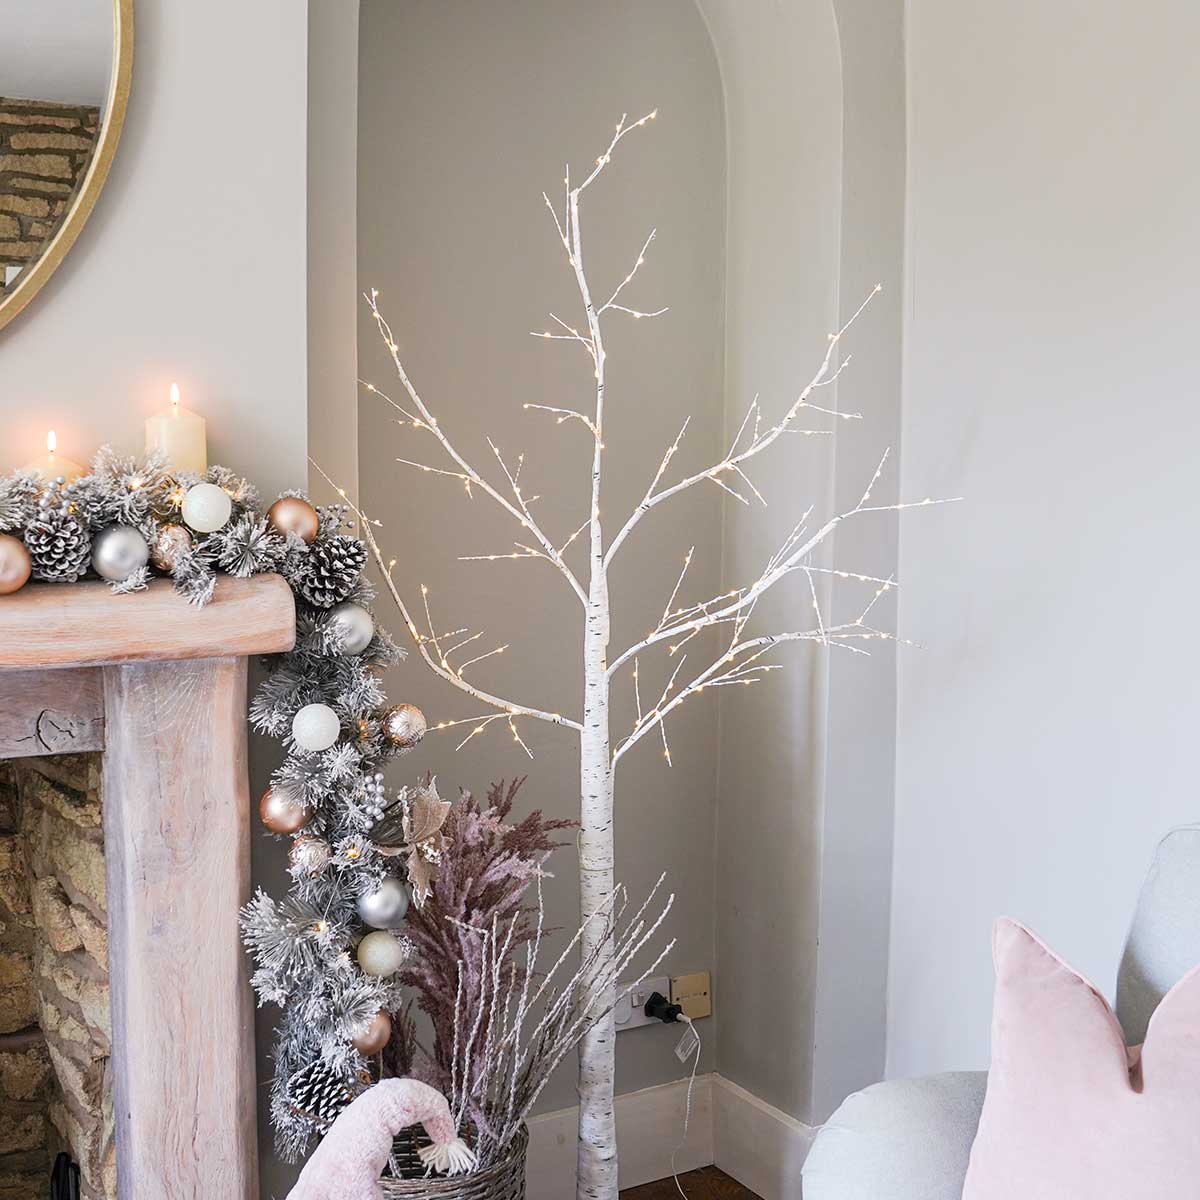 6Ft 72LED Silver Birch Tree Light W/ Icicle Twinkling Flexible Christmas Decor 